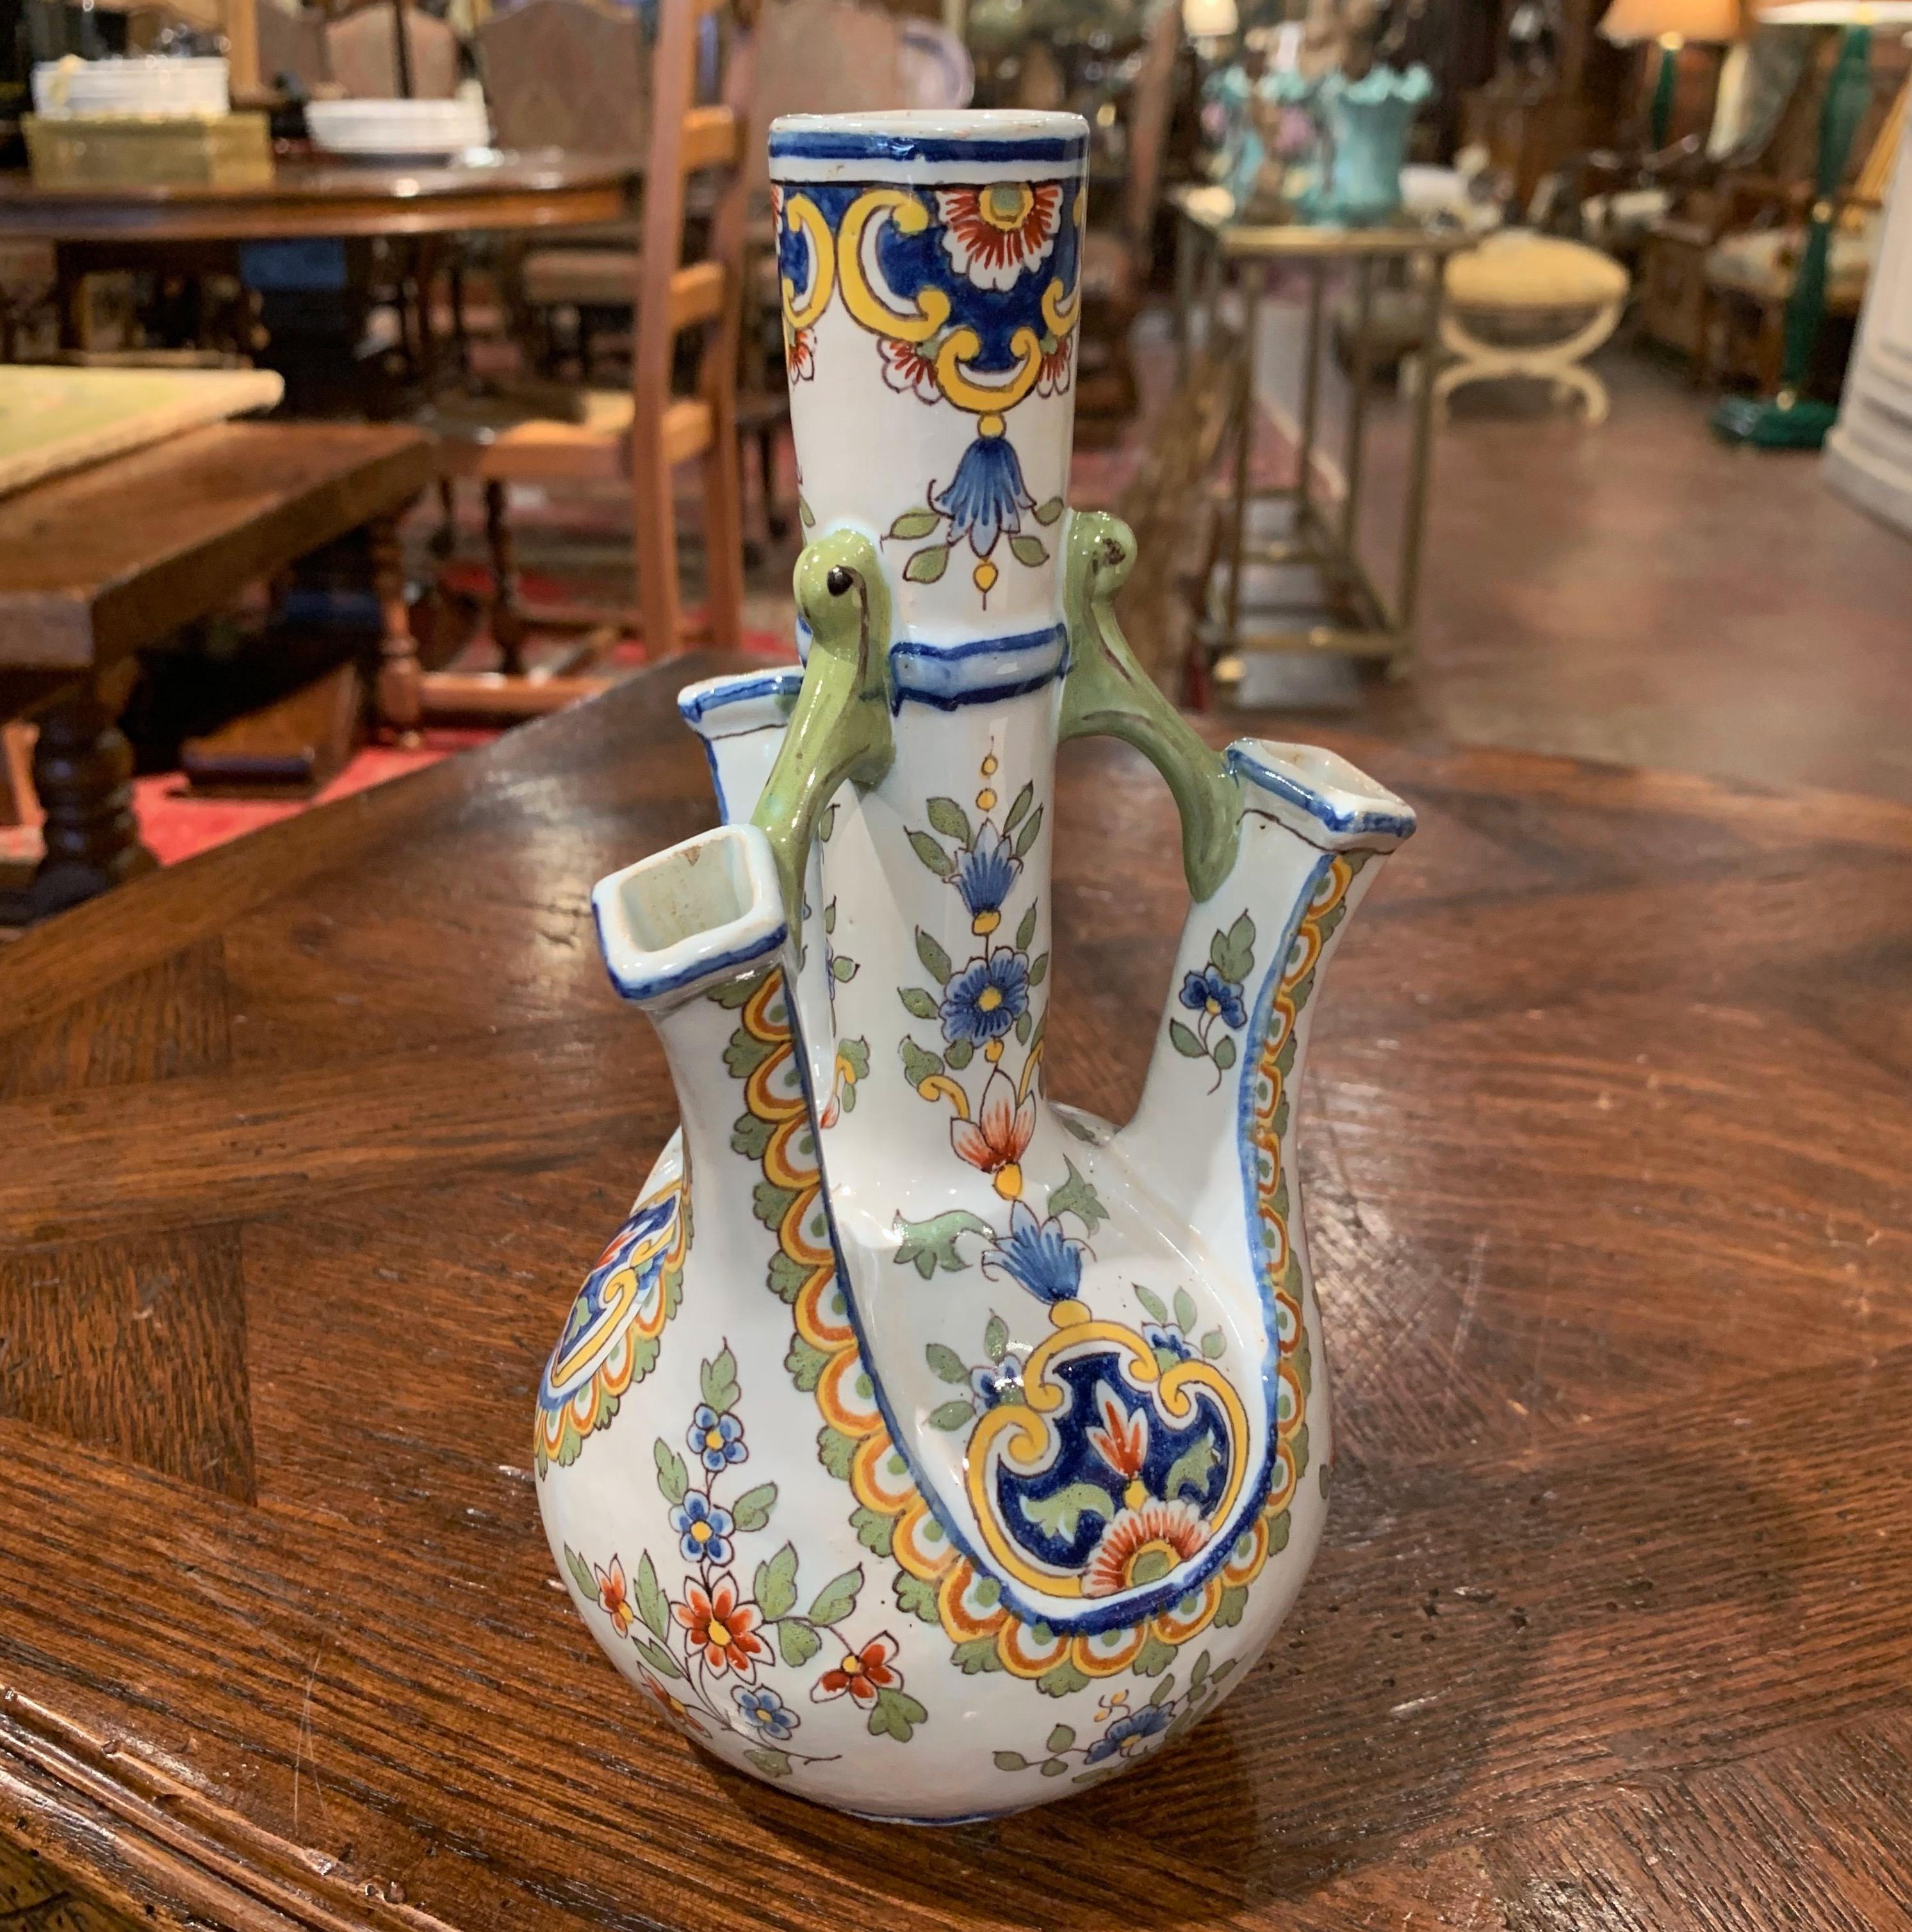 Place this interesting antique ceramic vase on a shelf or entry commode, crafted in Normandy, France, circa 1900, the Classic vase is round in shape and features four entrances for flowers including a larger one in the center. The vase is hand